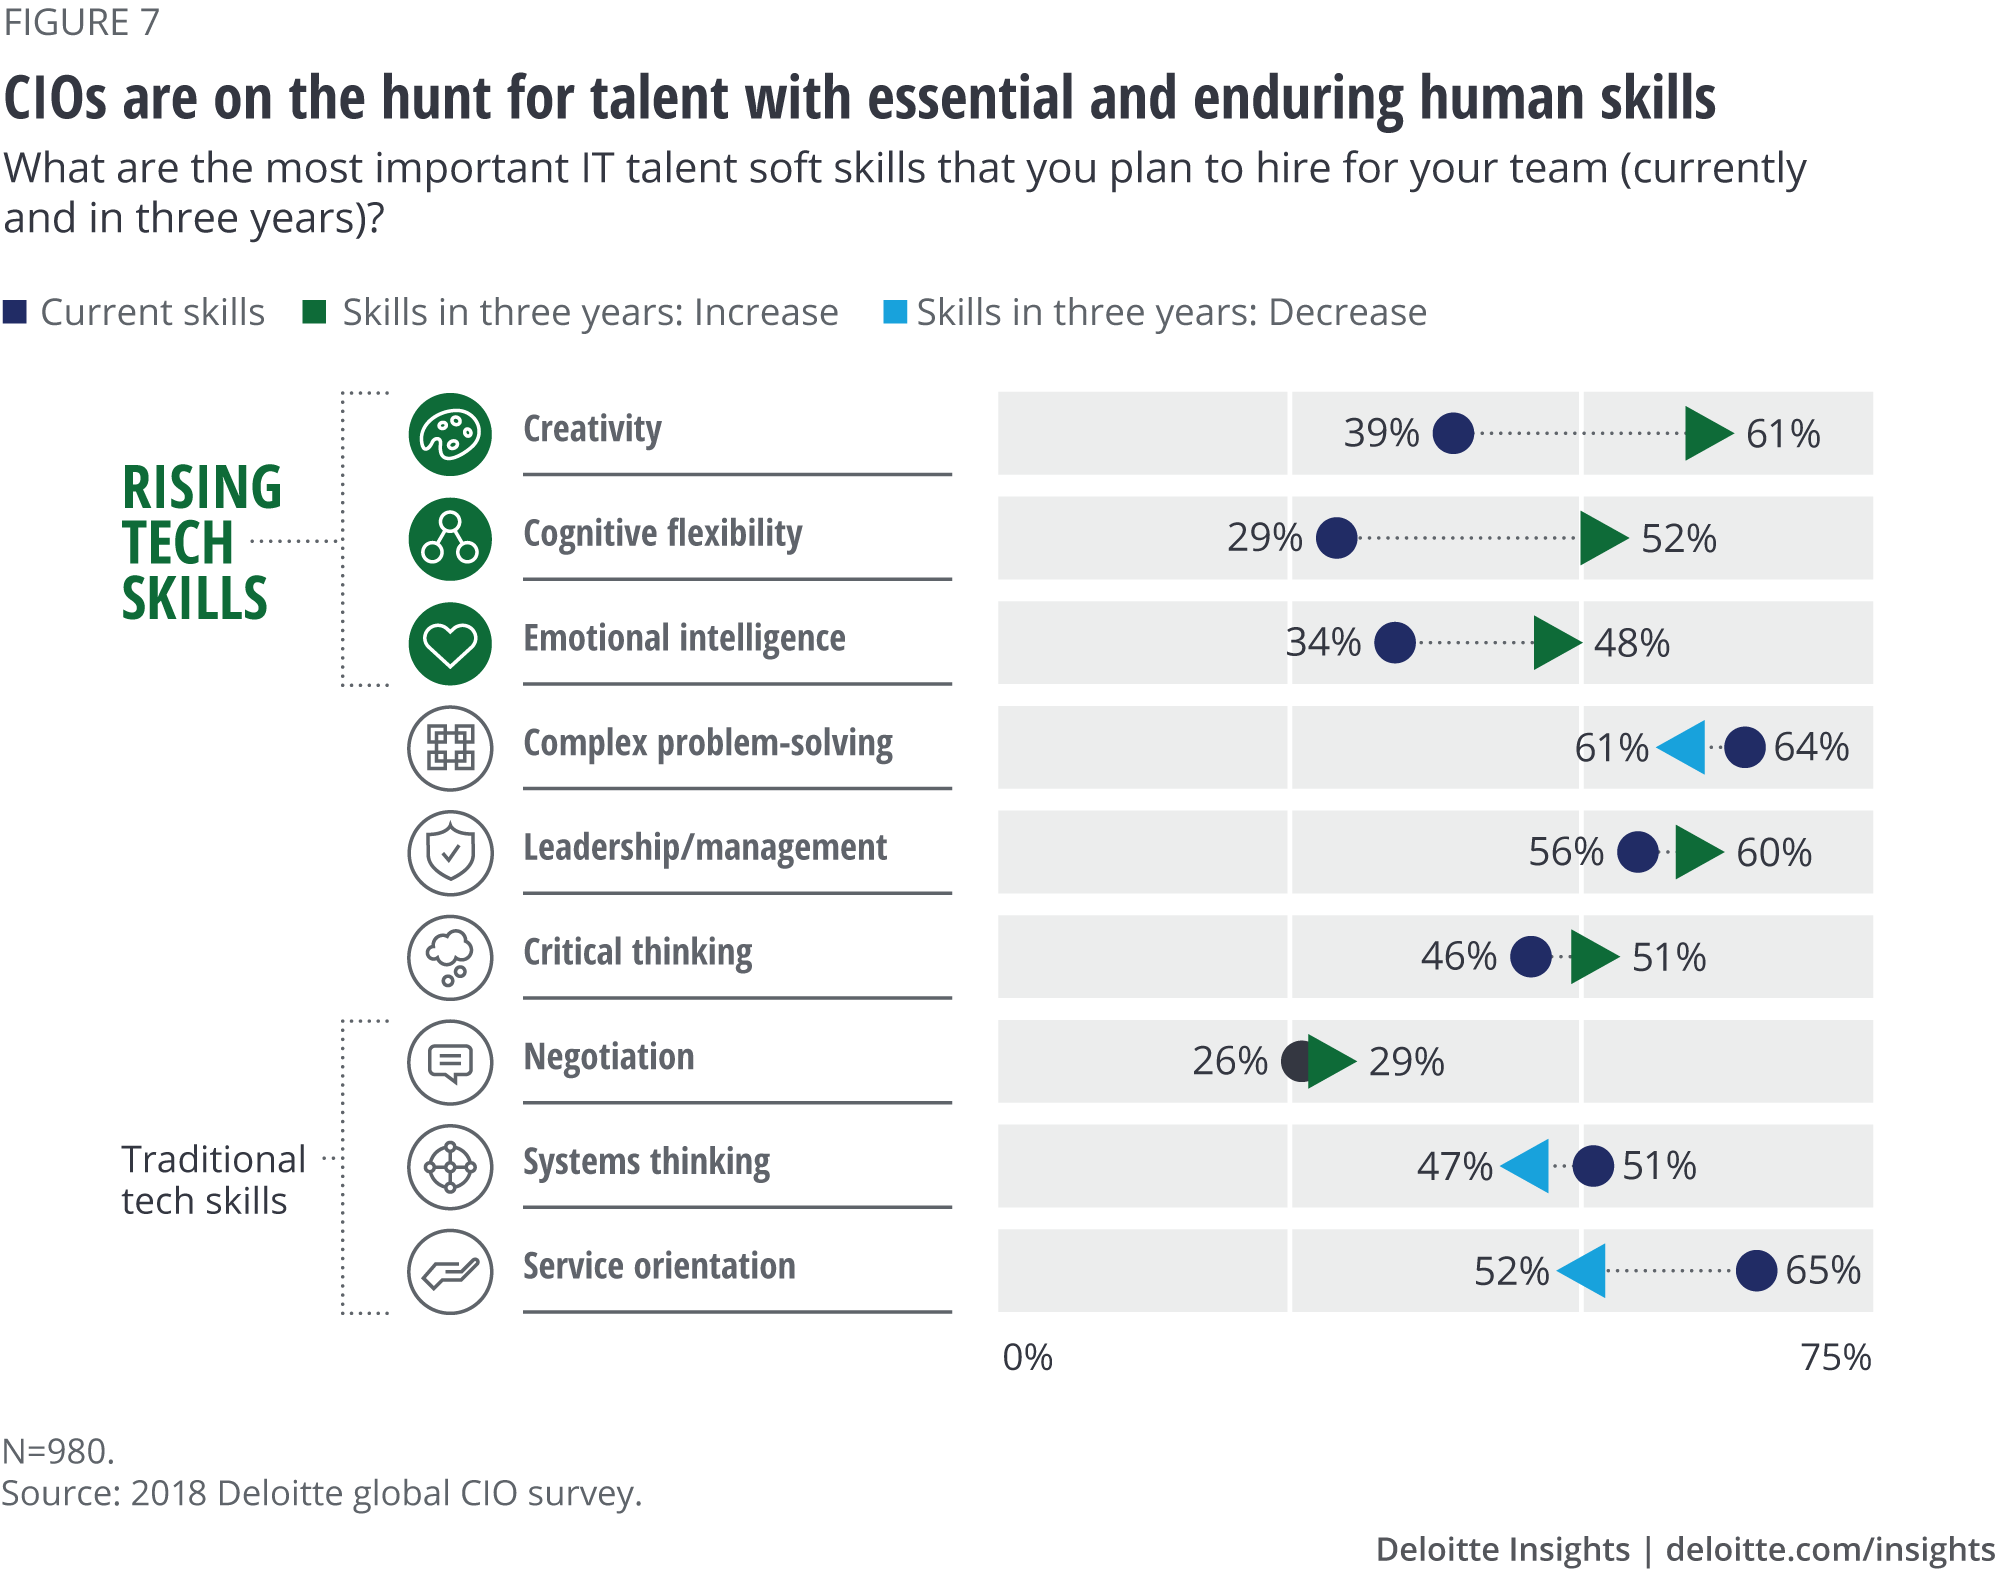 CIOs are on the hunt for talent with essential and enduring human skills